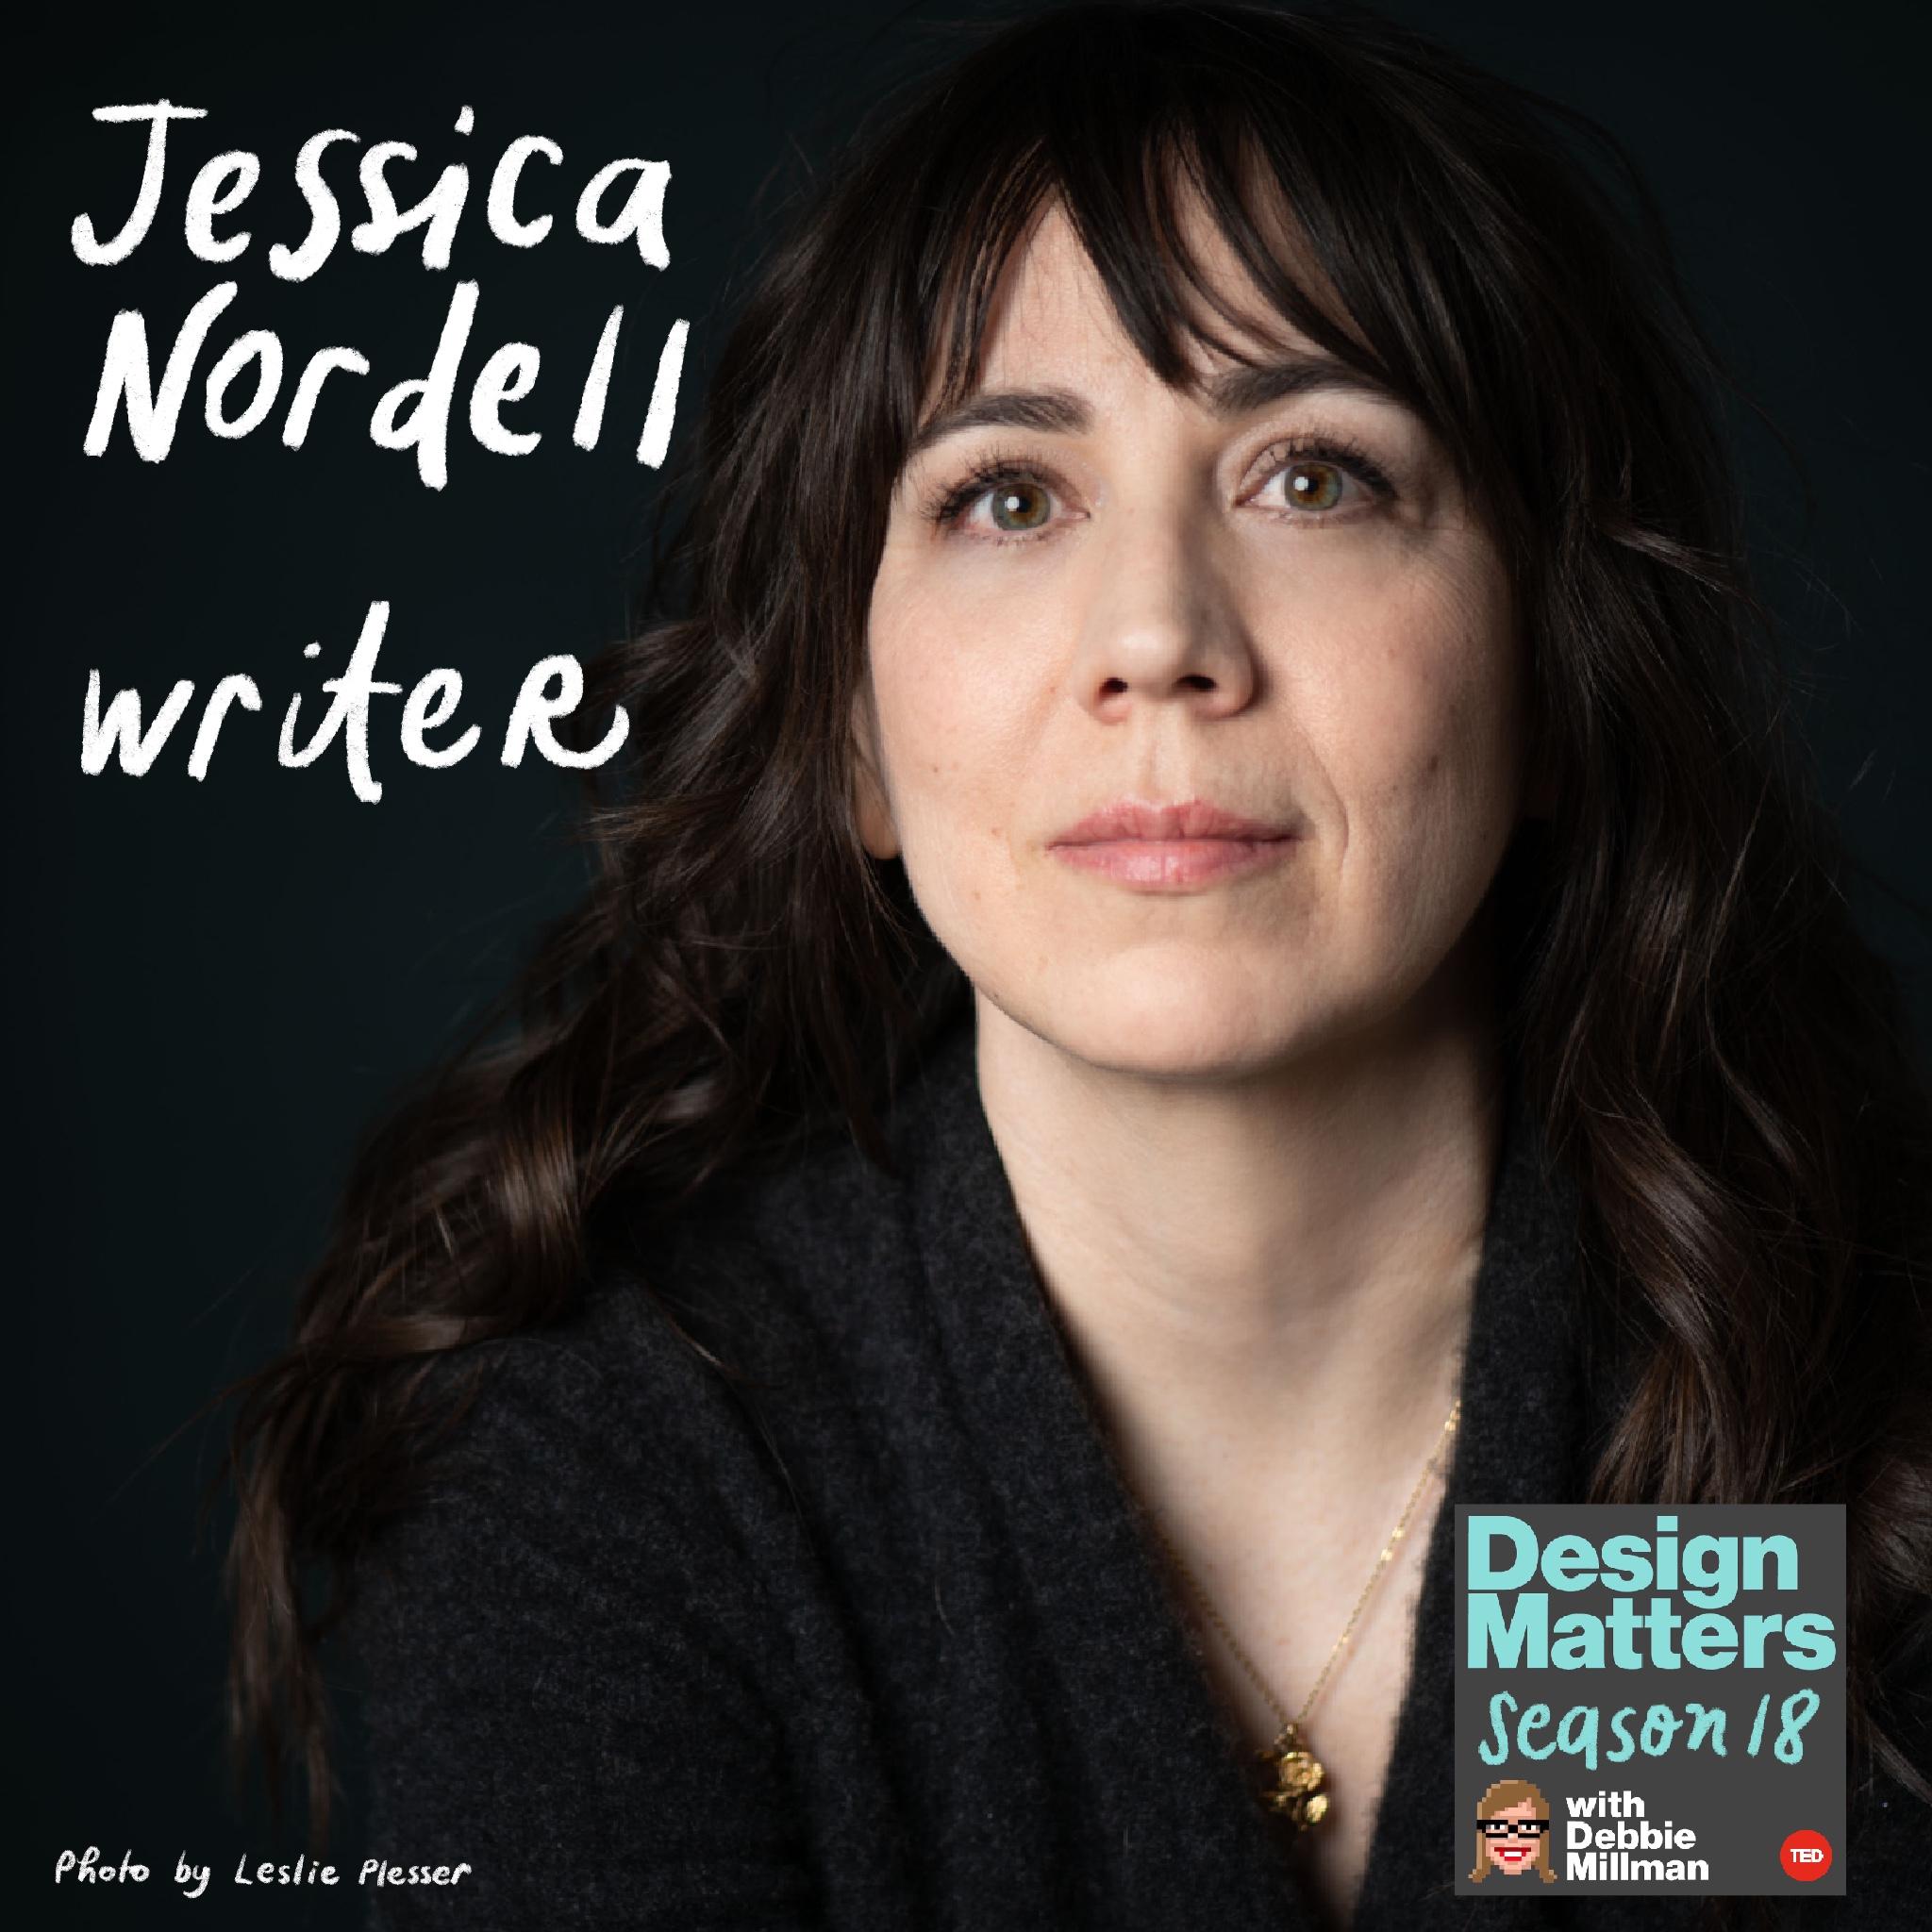 Thumbnail for "Jessica Nordell".